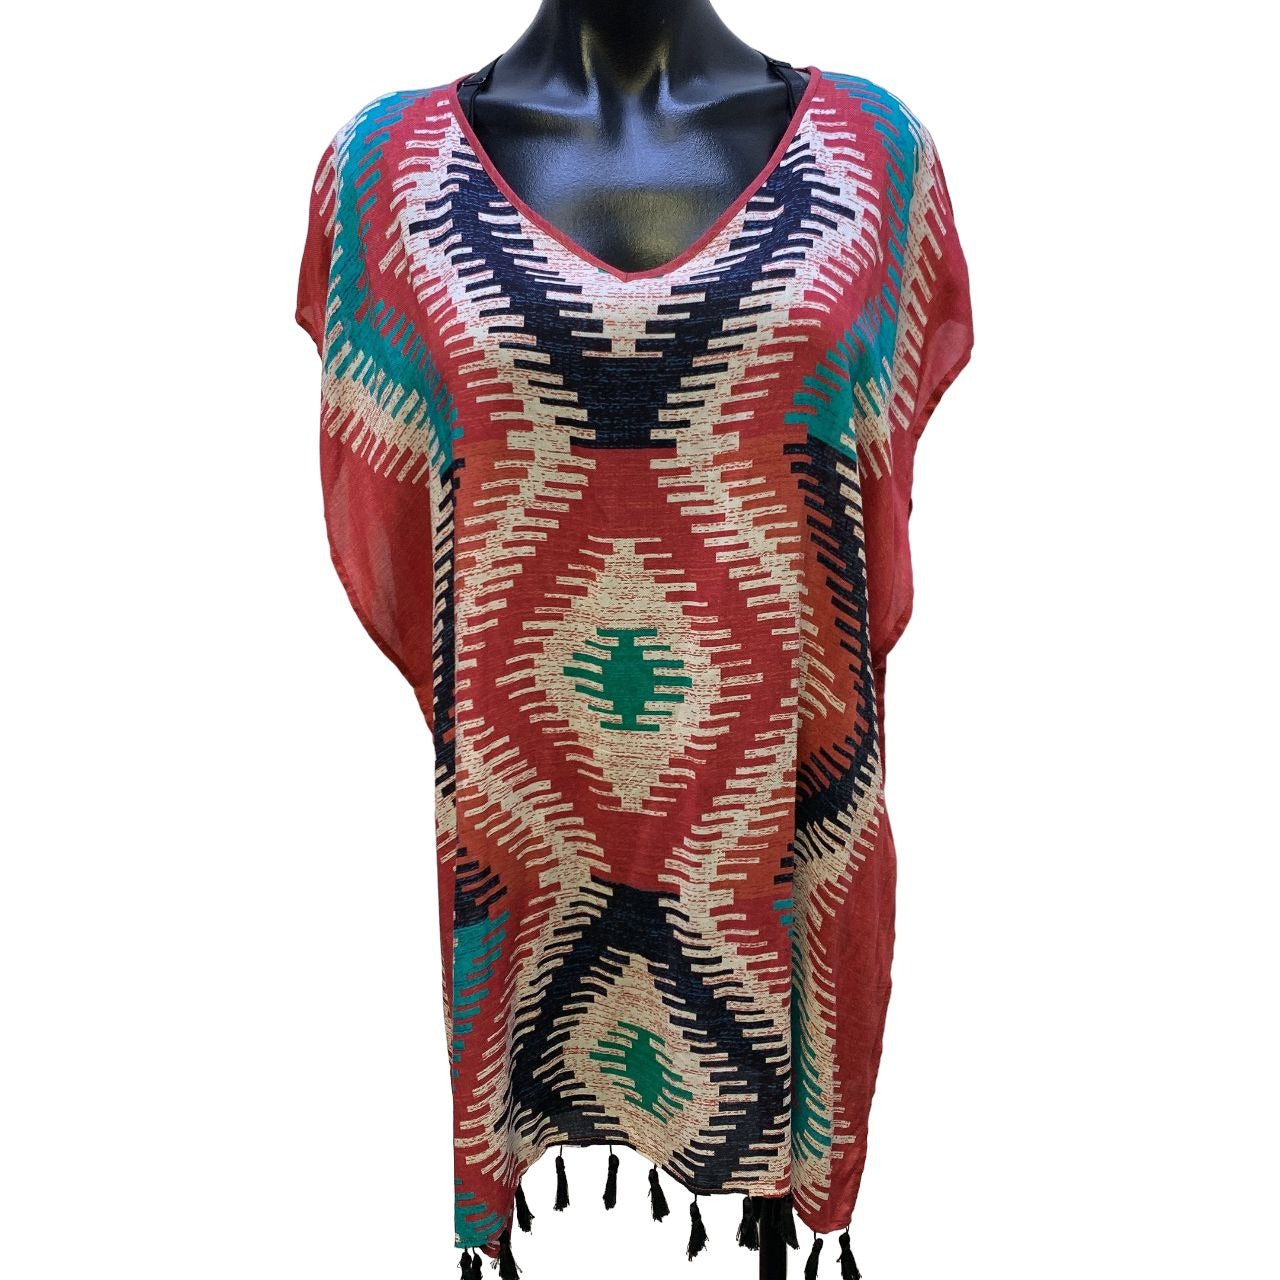 *Double D Ranch Multi-colored Southwestern Print Fringed Poncho Size S/M